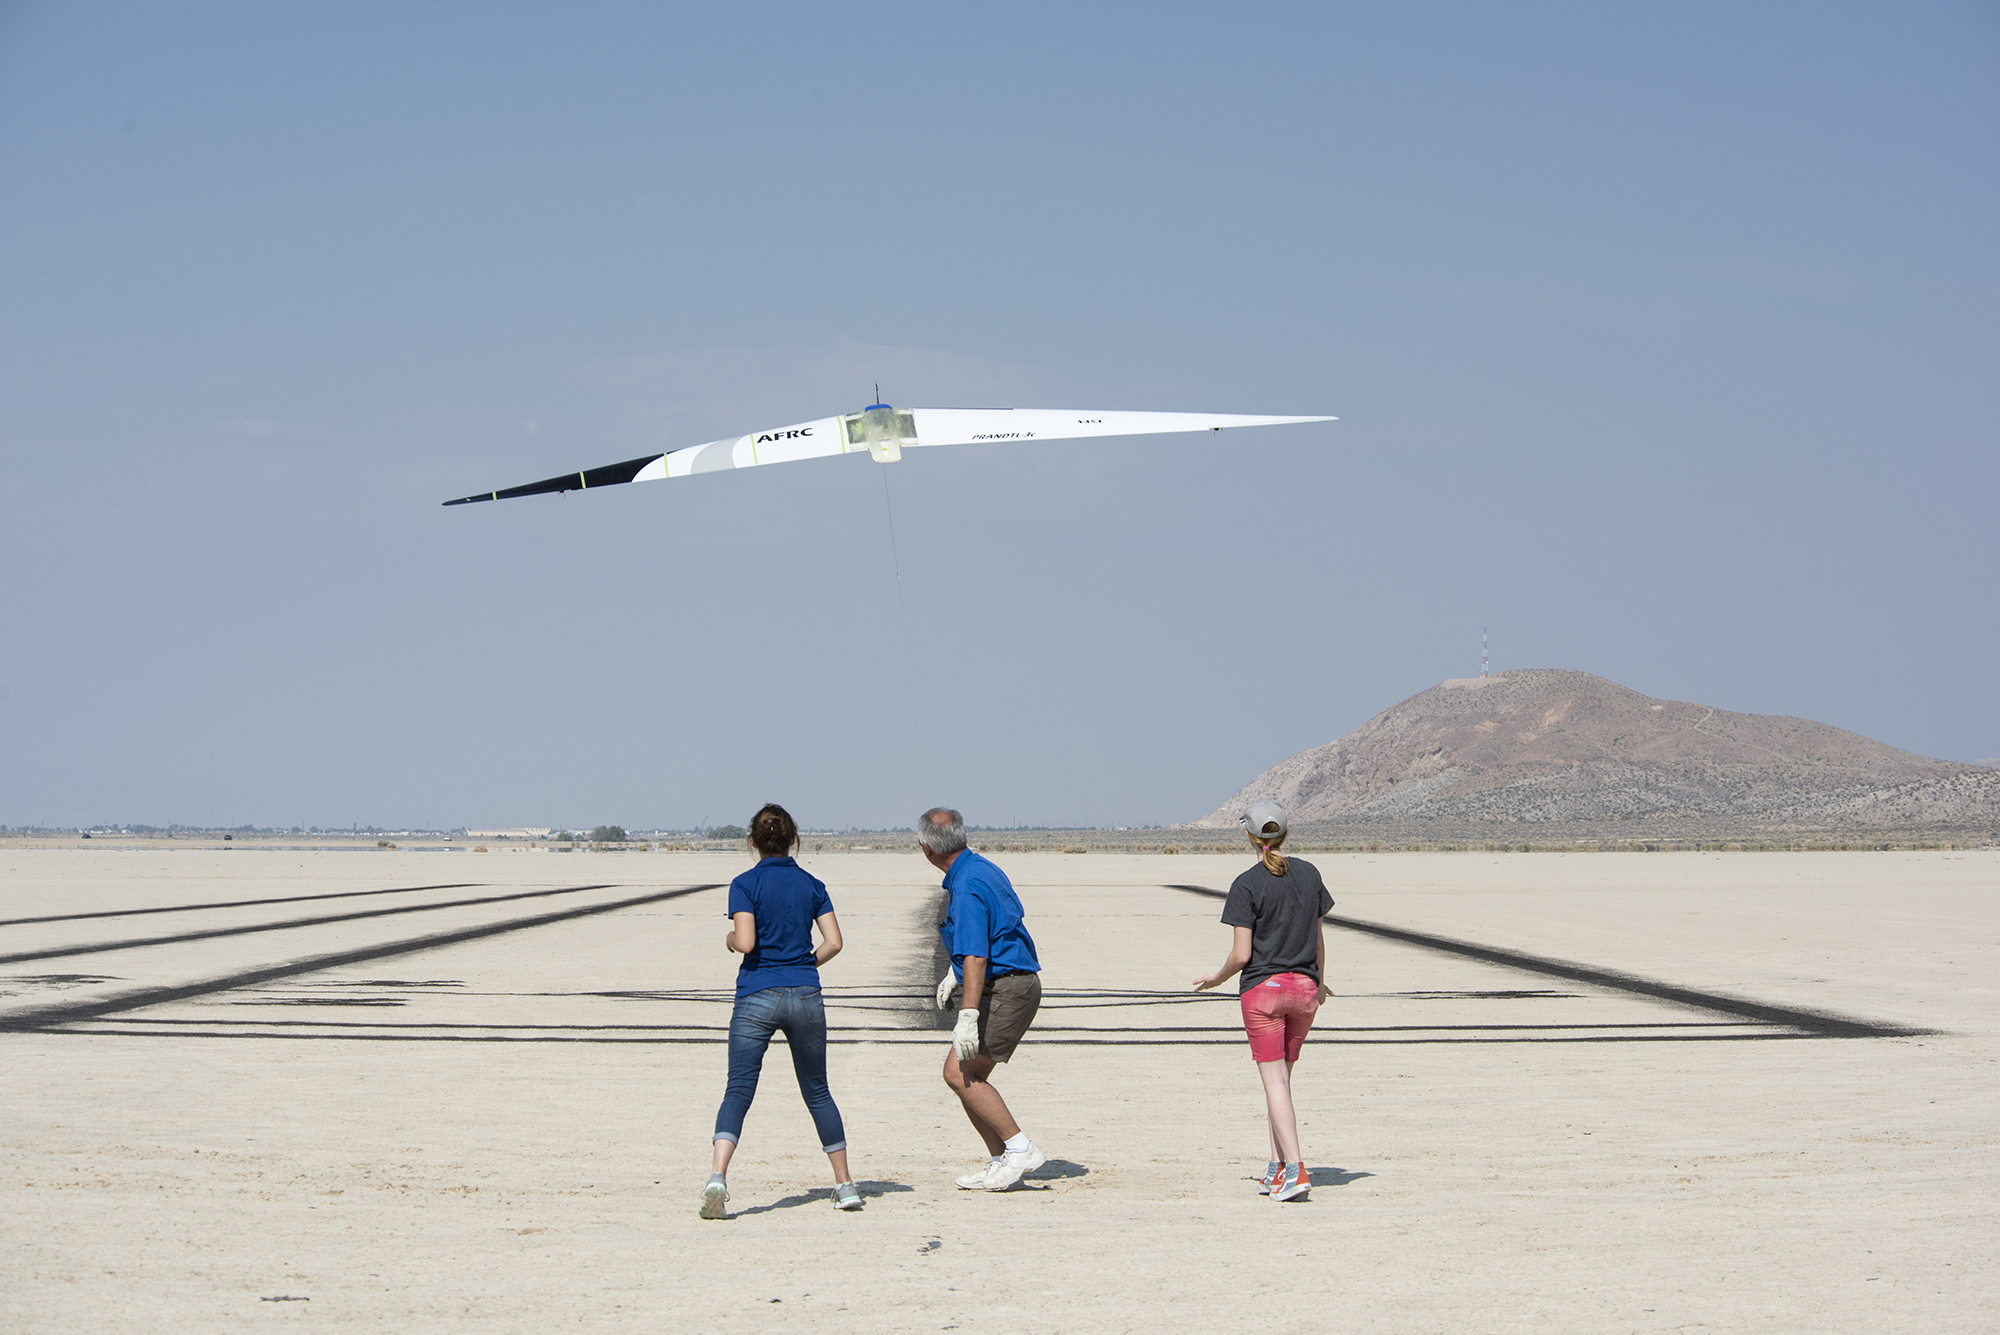 Deborah Jackson, Al Bowers and Abbigail Waddell successfully launch the subscale Prandtl-D 3C glider.